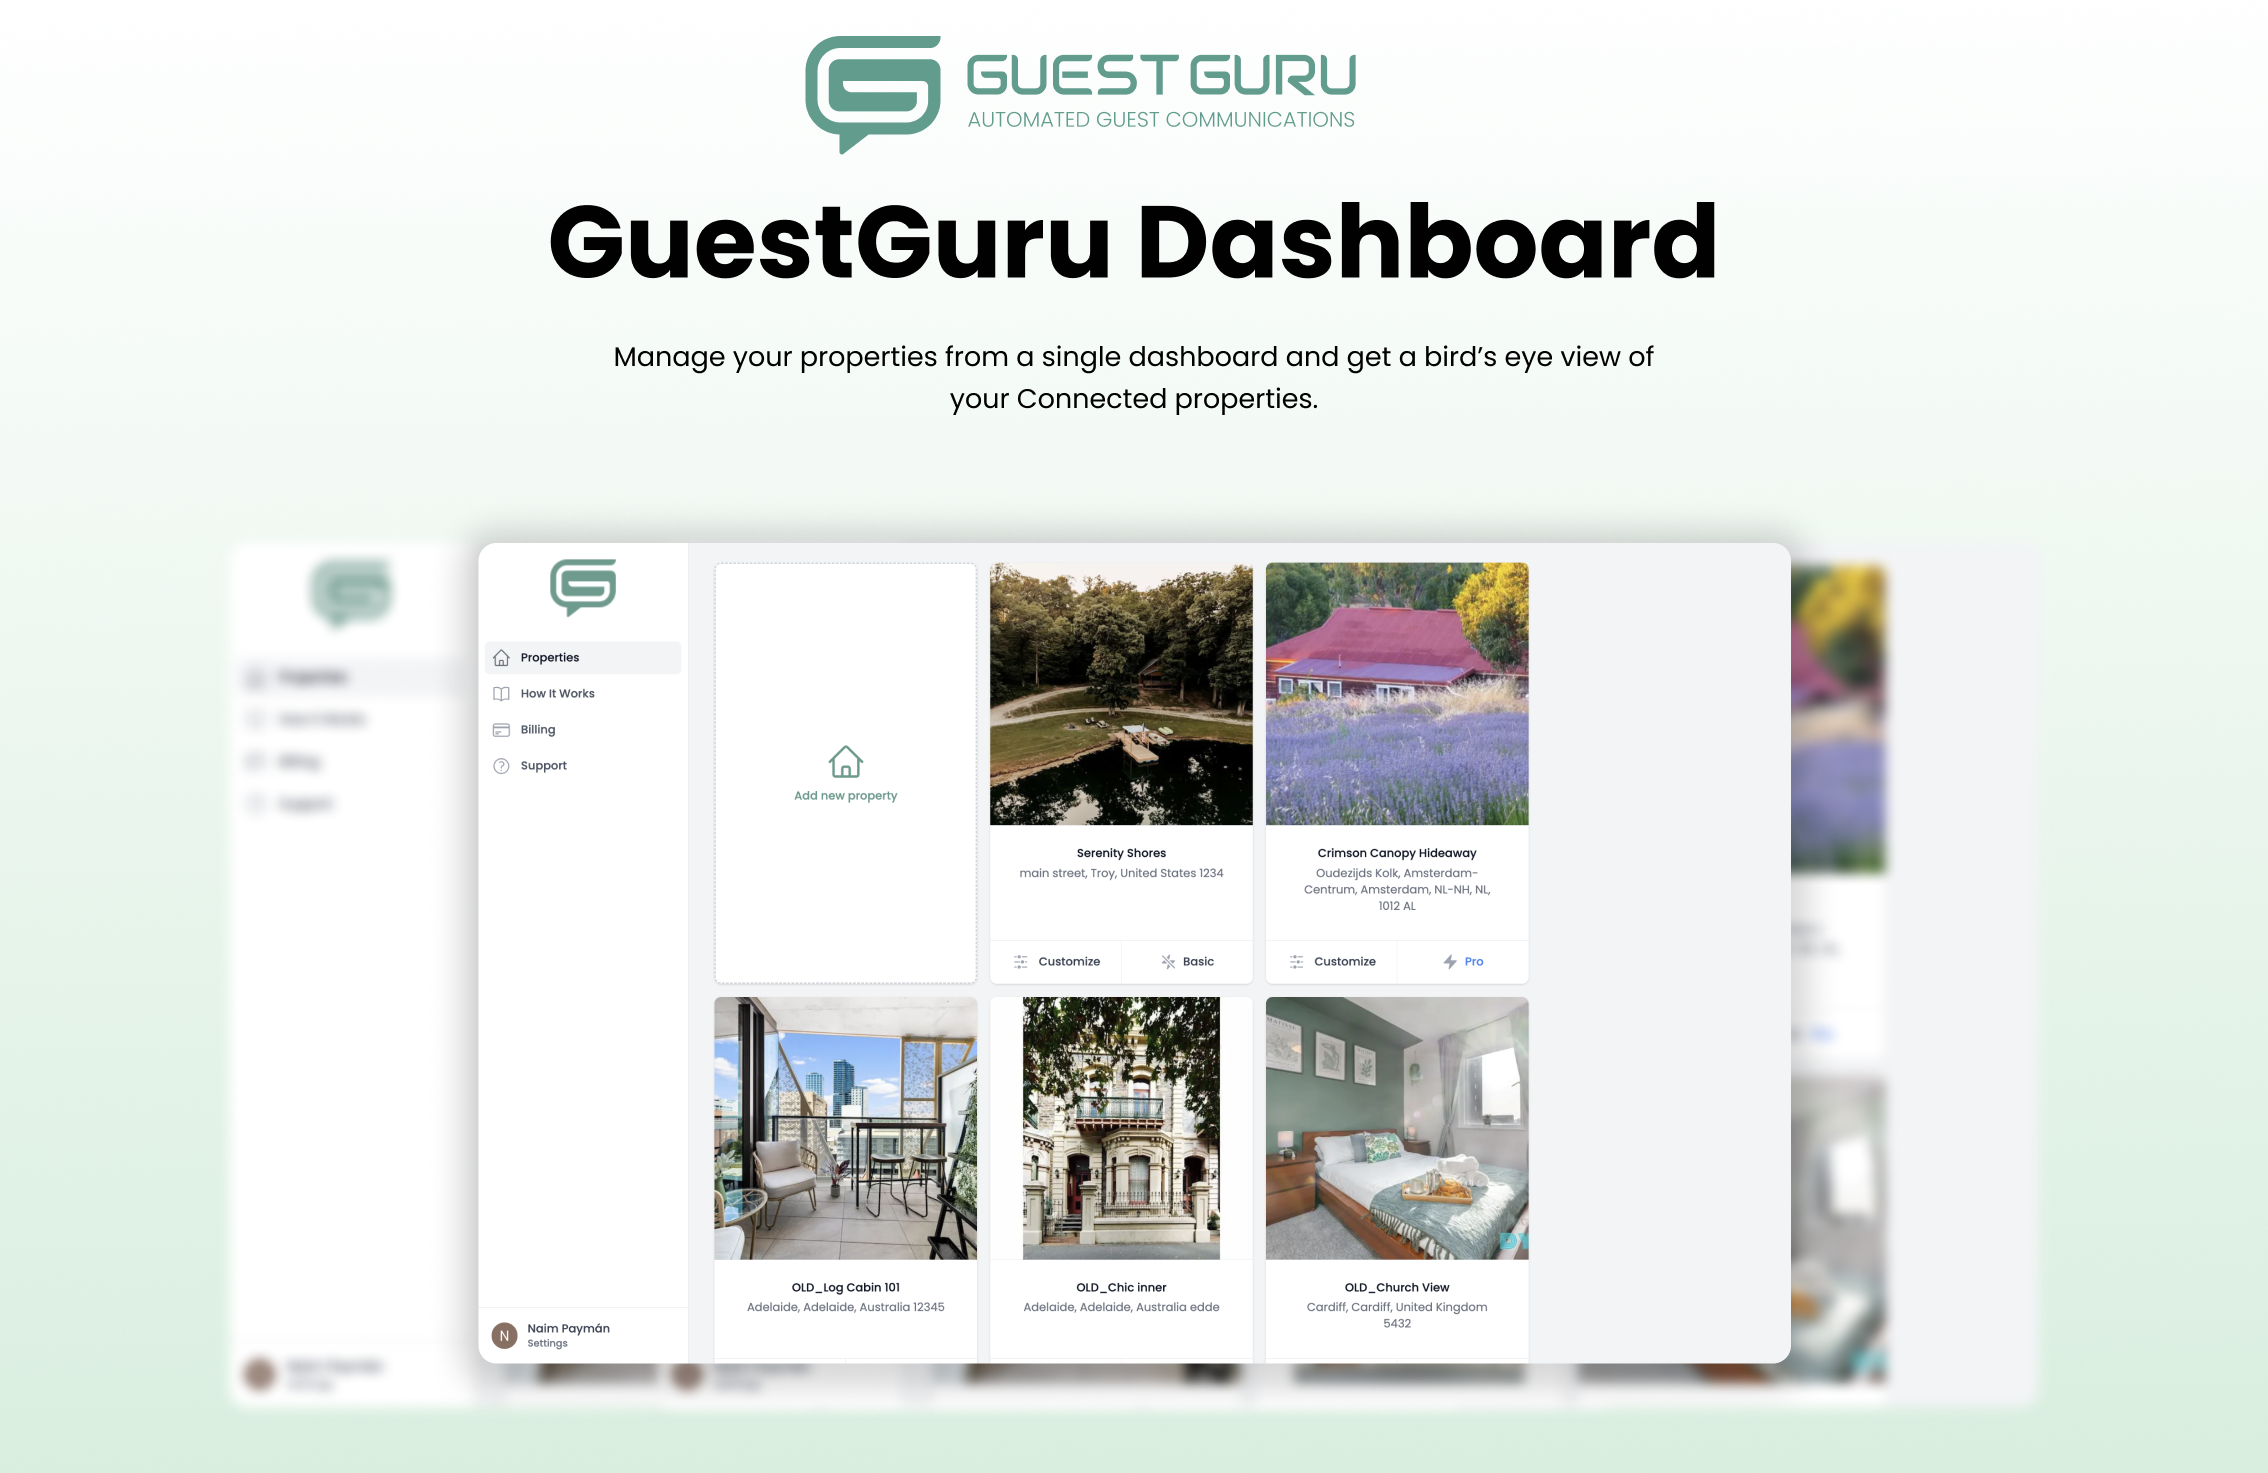 GuestGuru Dashboard lets you access and manage all your properties